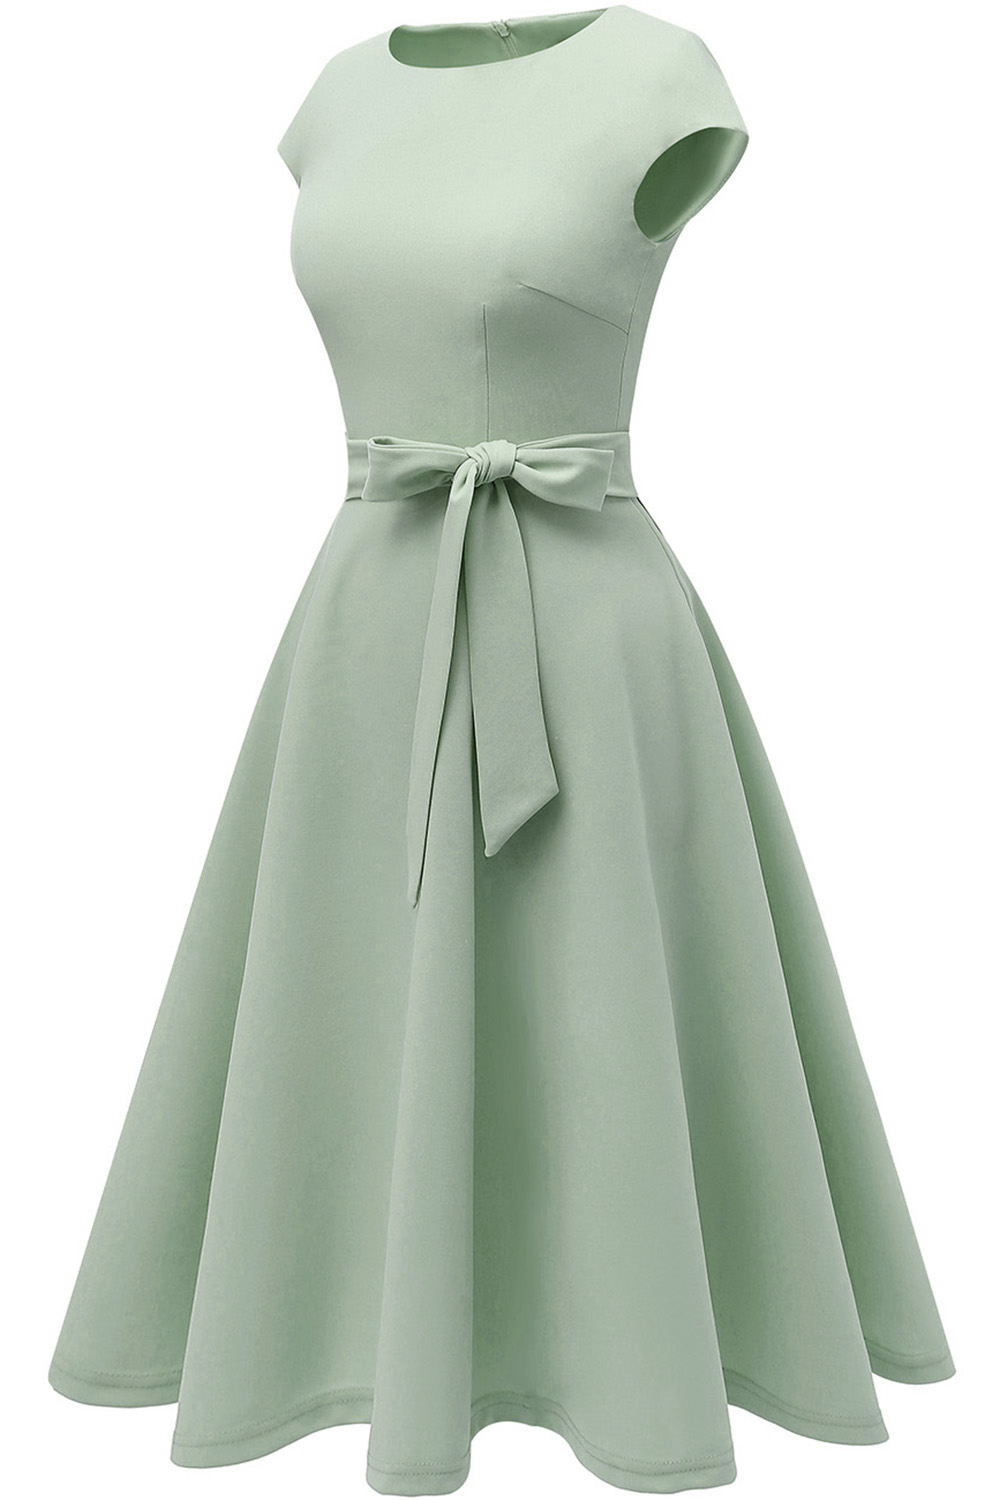 A-Line Knee-Length Lightgreen Cocktail Dress with Cap Sleeves, Vintage Style, Unique and Elegant